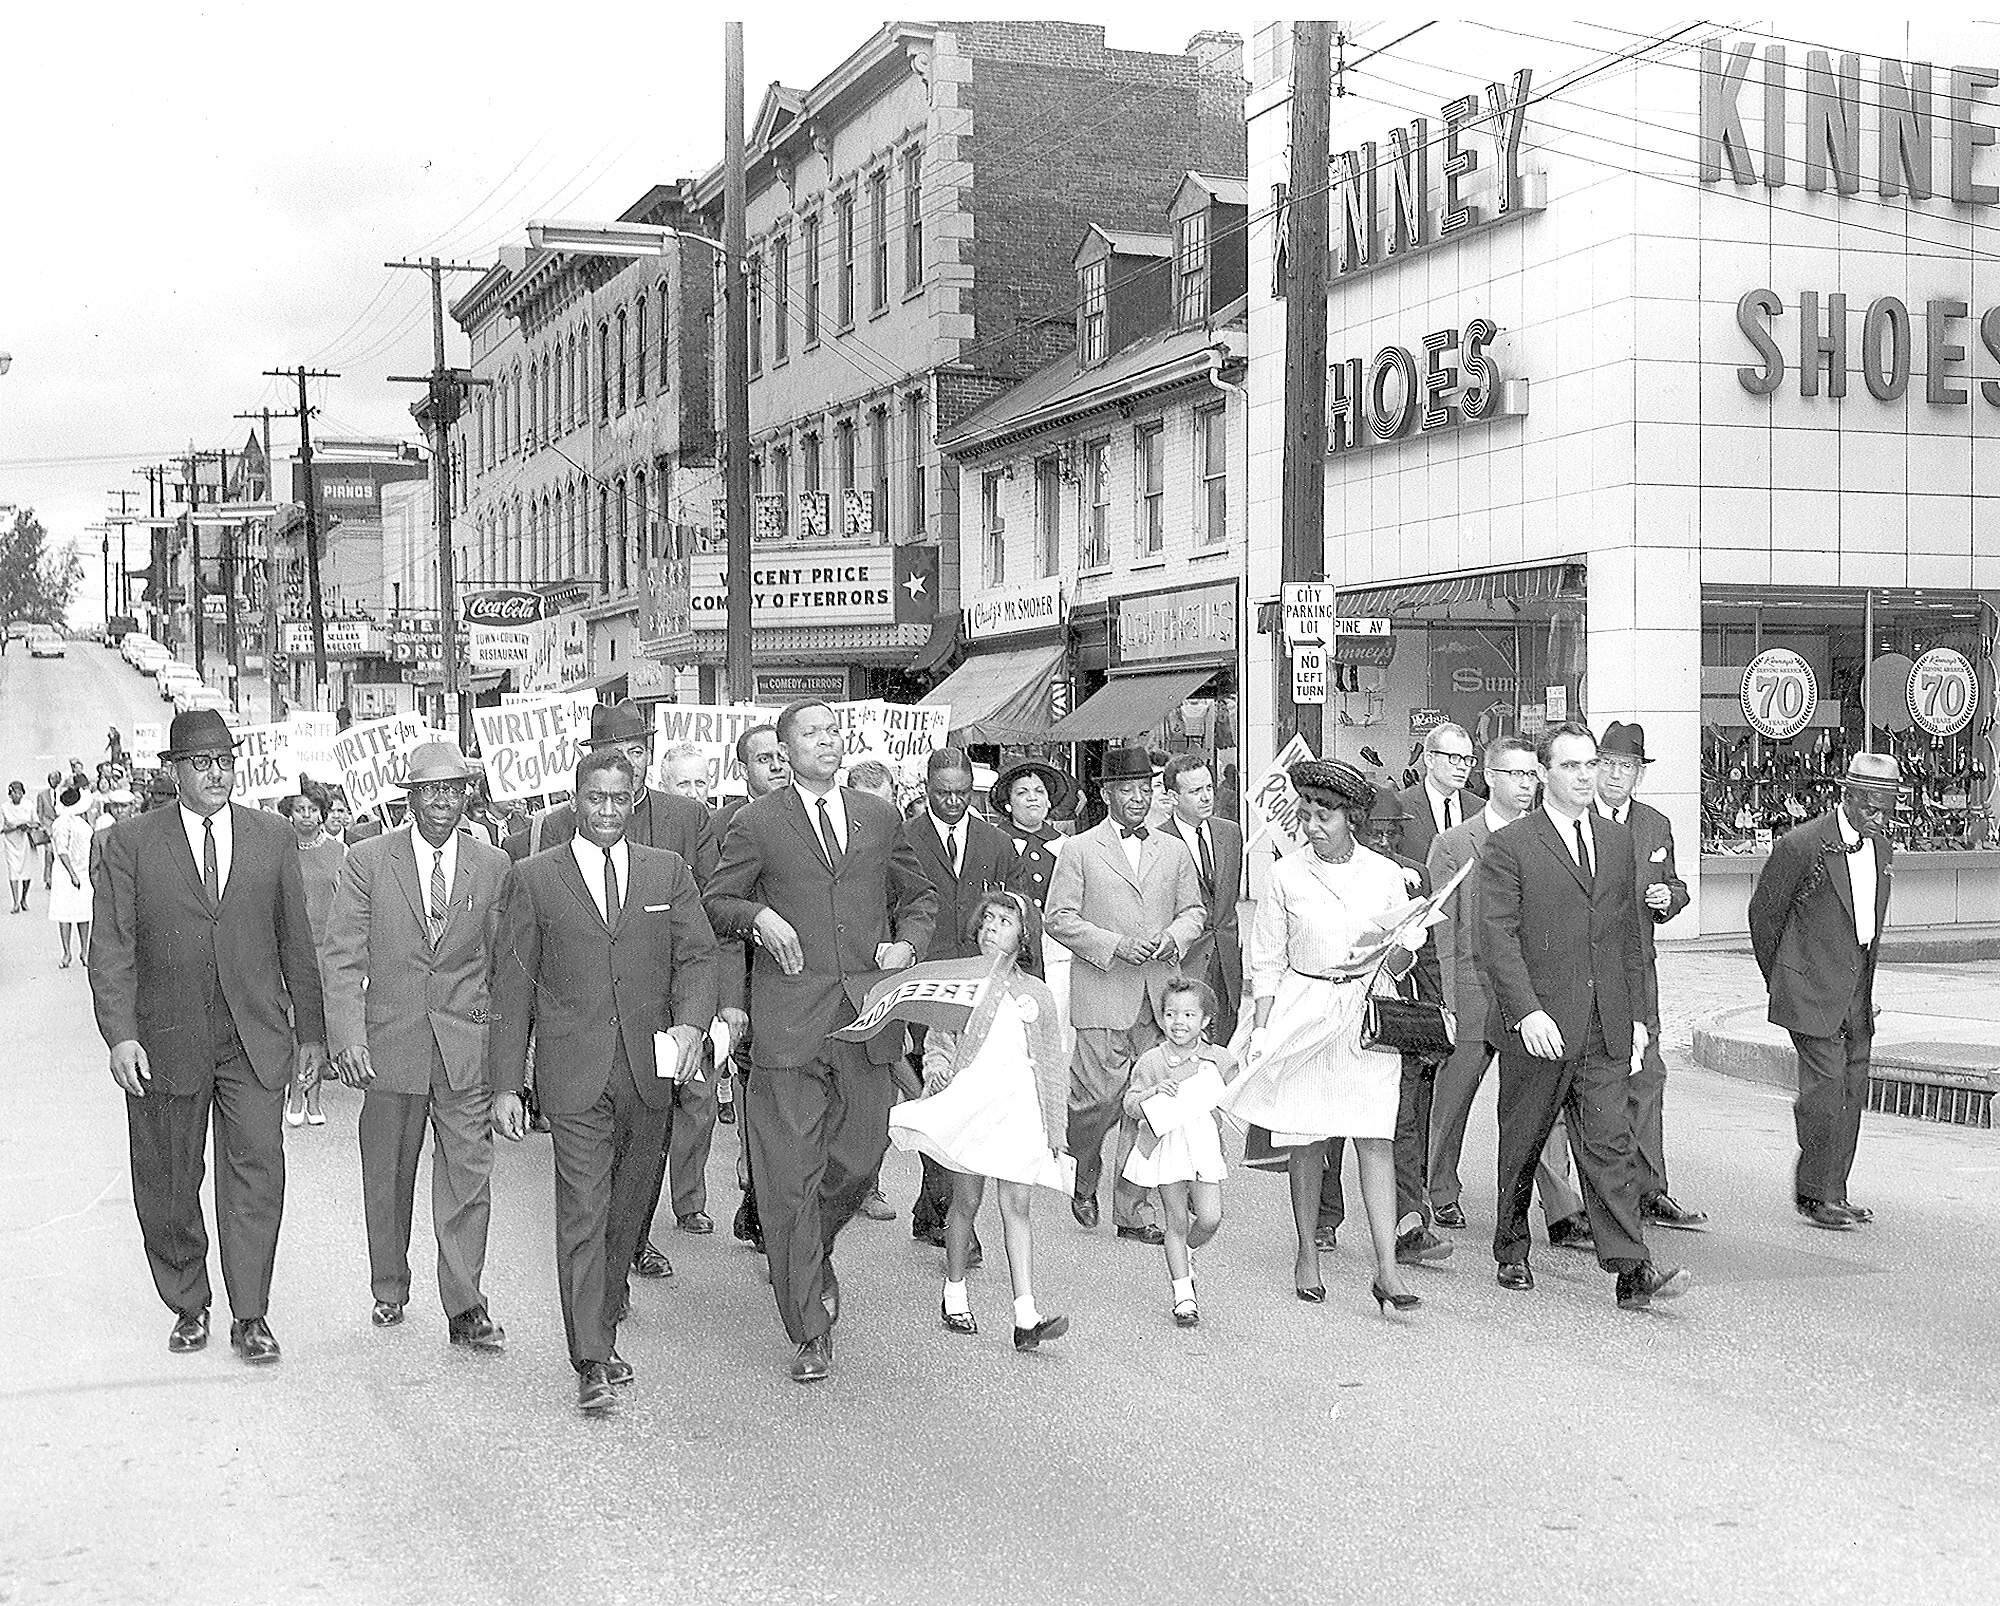 Civil rights march - ‘March to the Post Office’ - in Washington PA in April 1964.   Photo credit: Observer-Reporter